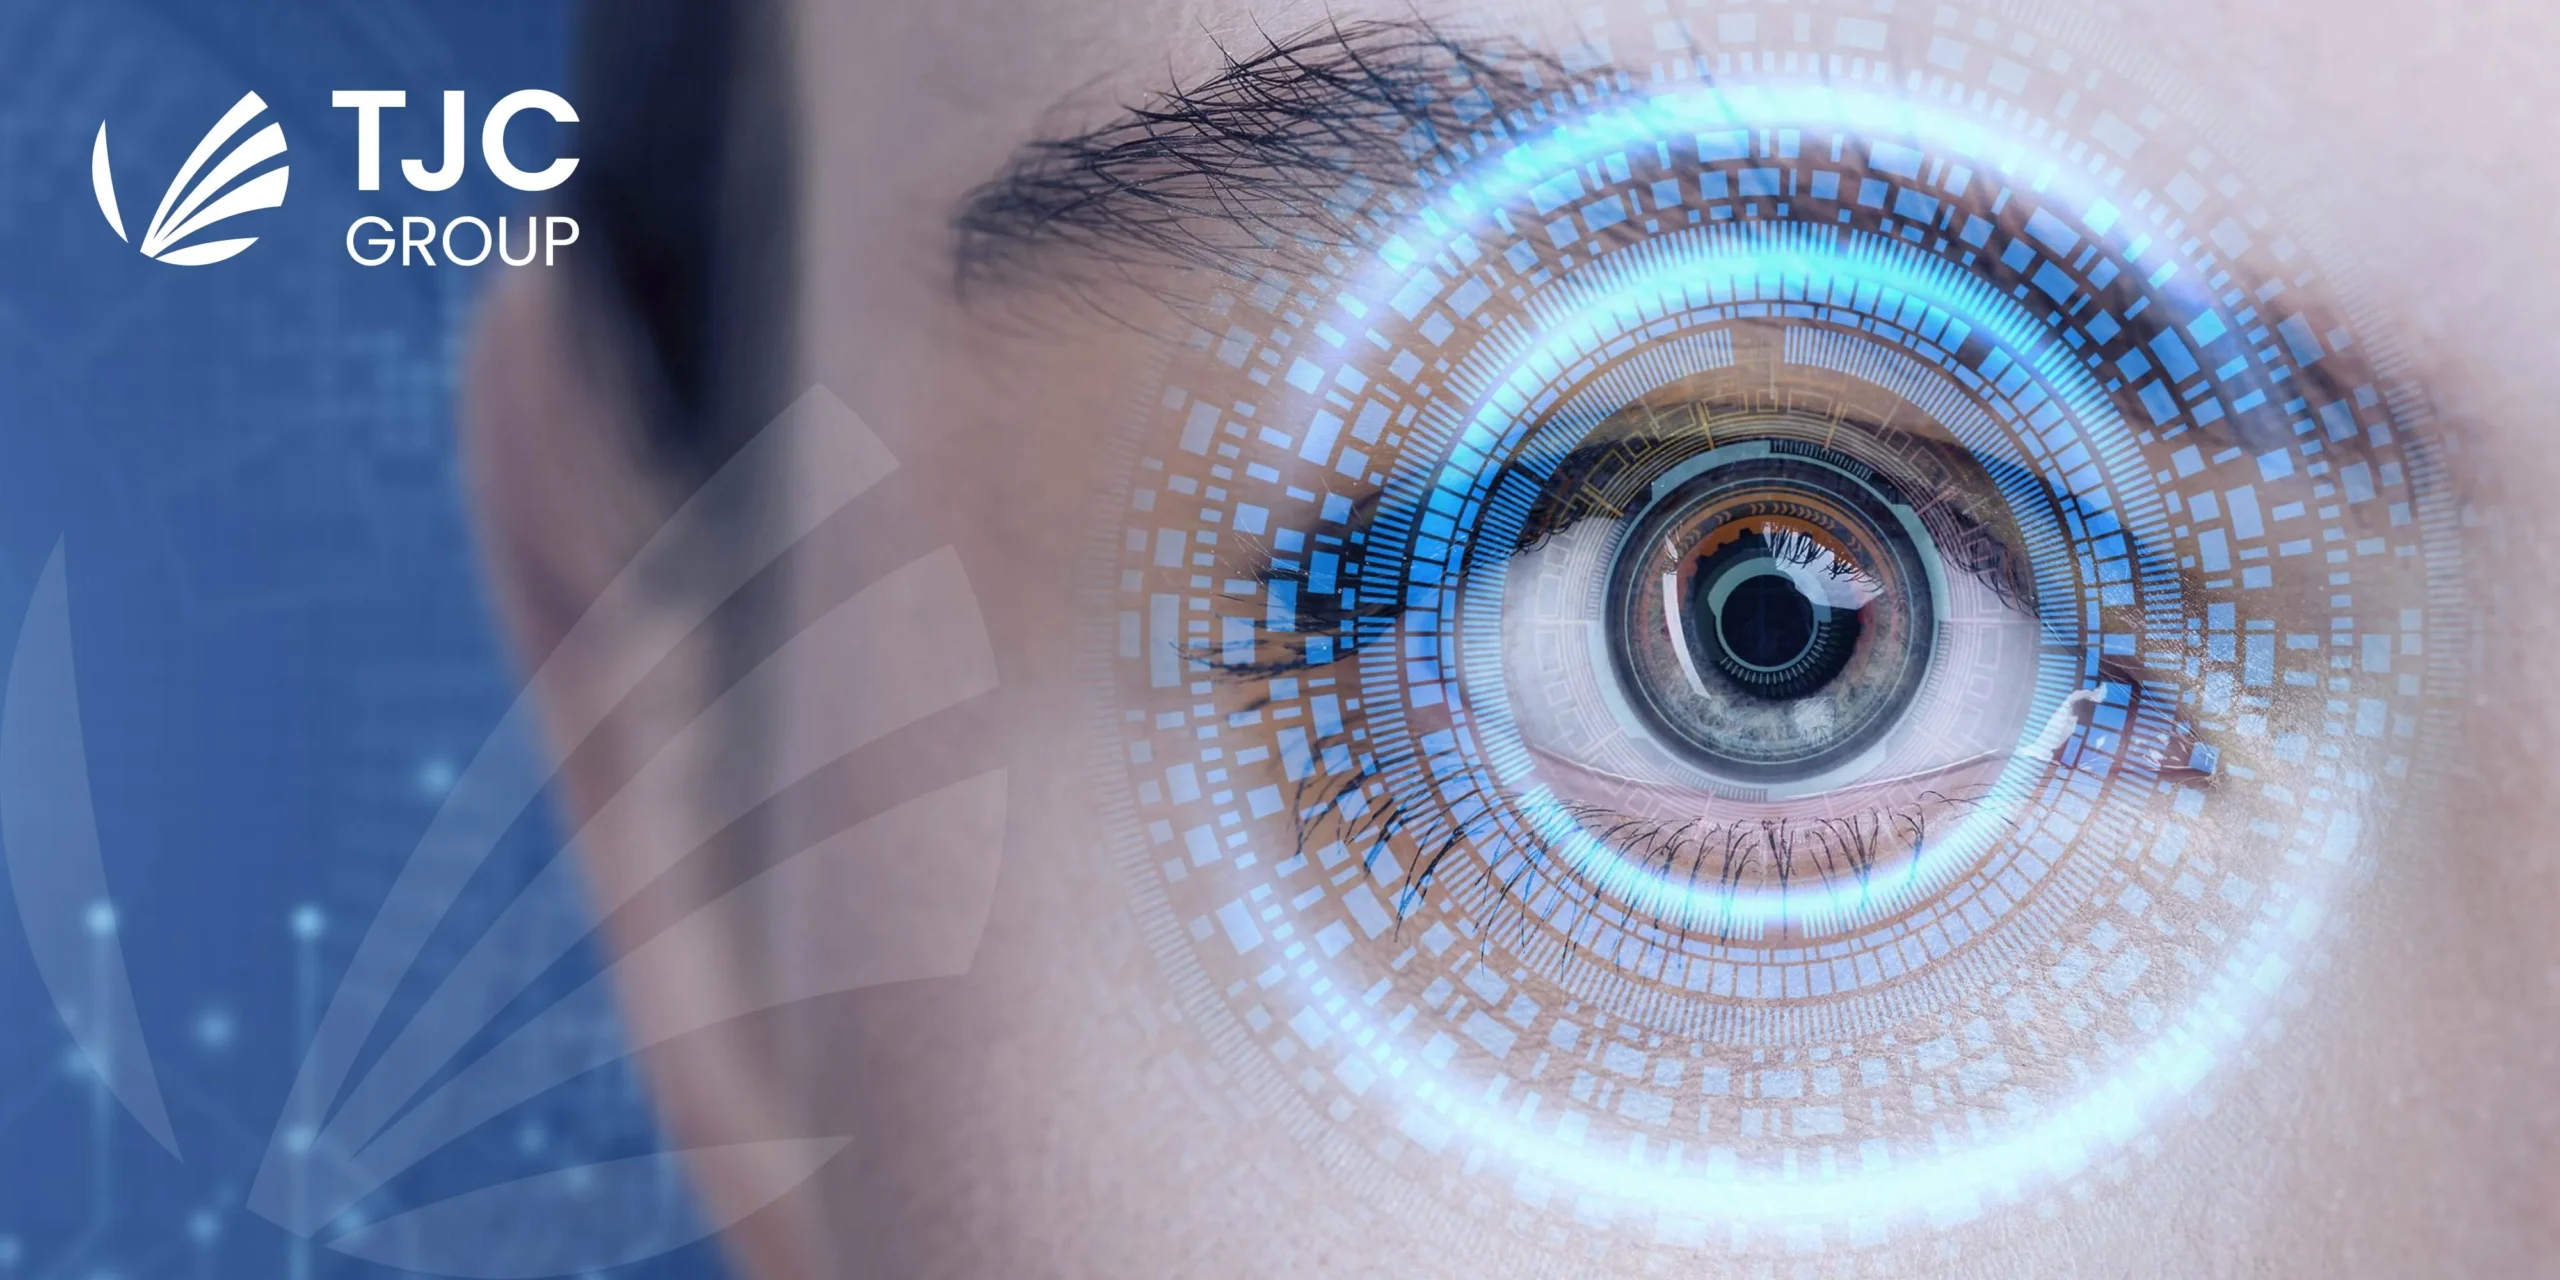 “Two pairs of Eyes” usage in data archiving, retention management, and data privacy.